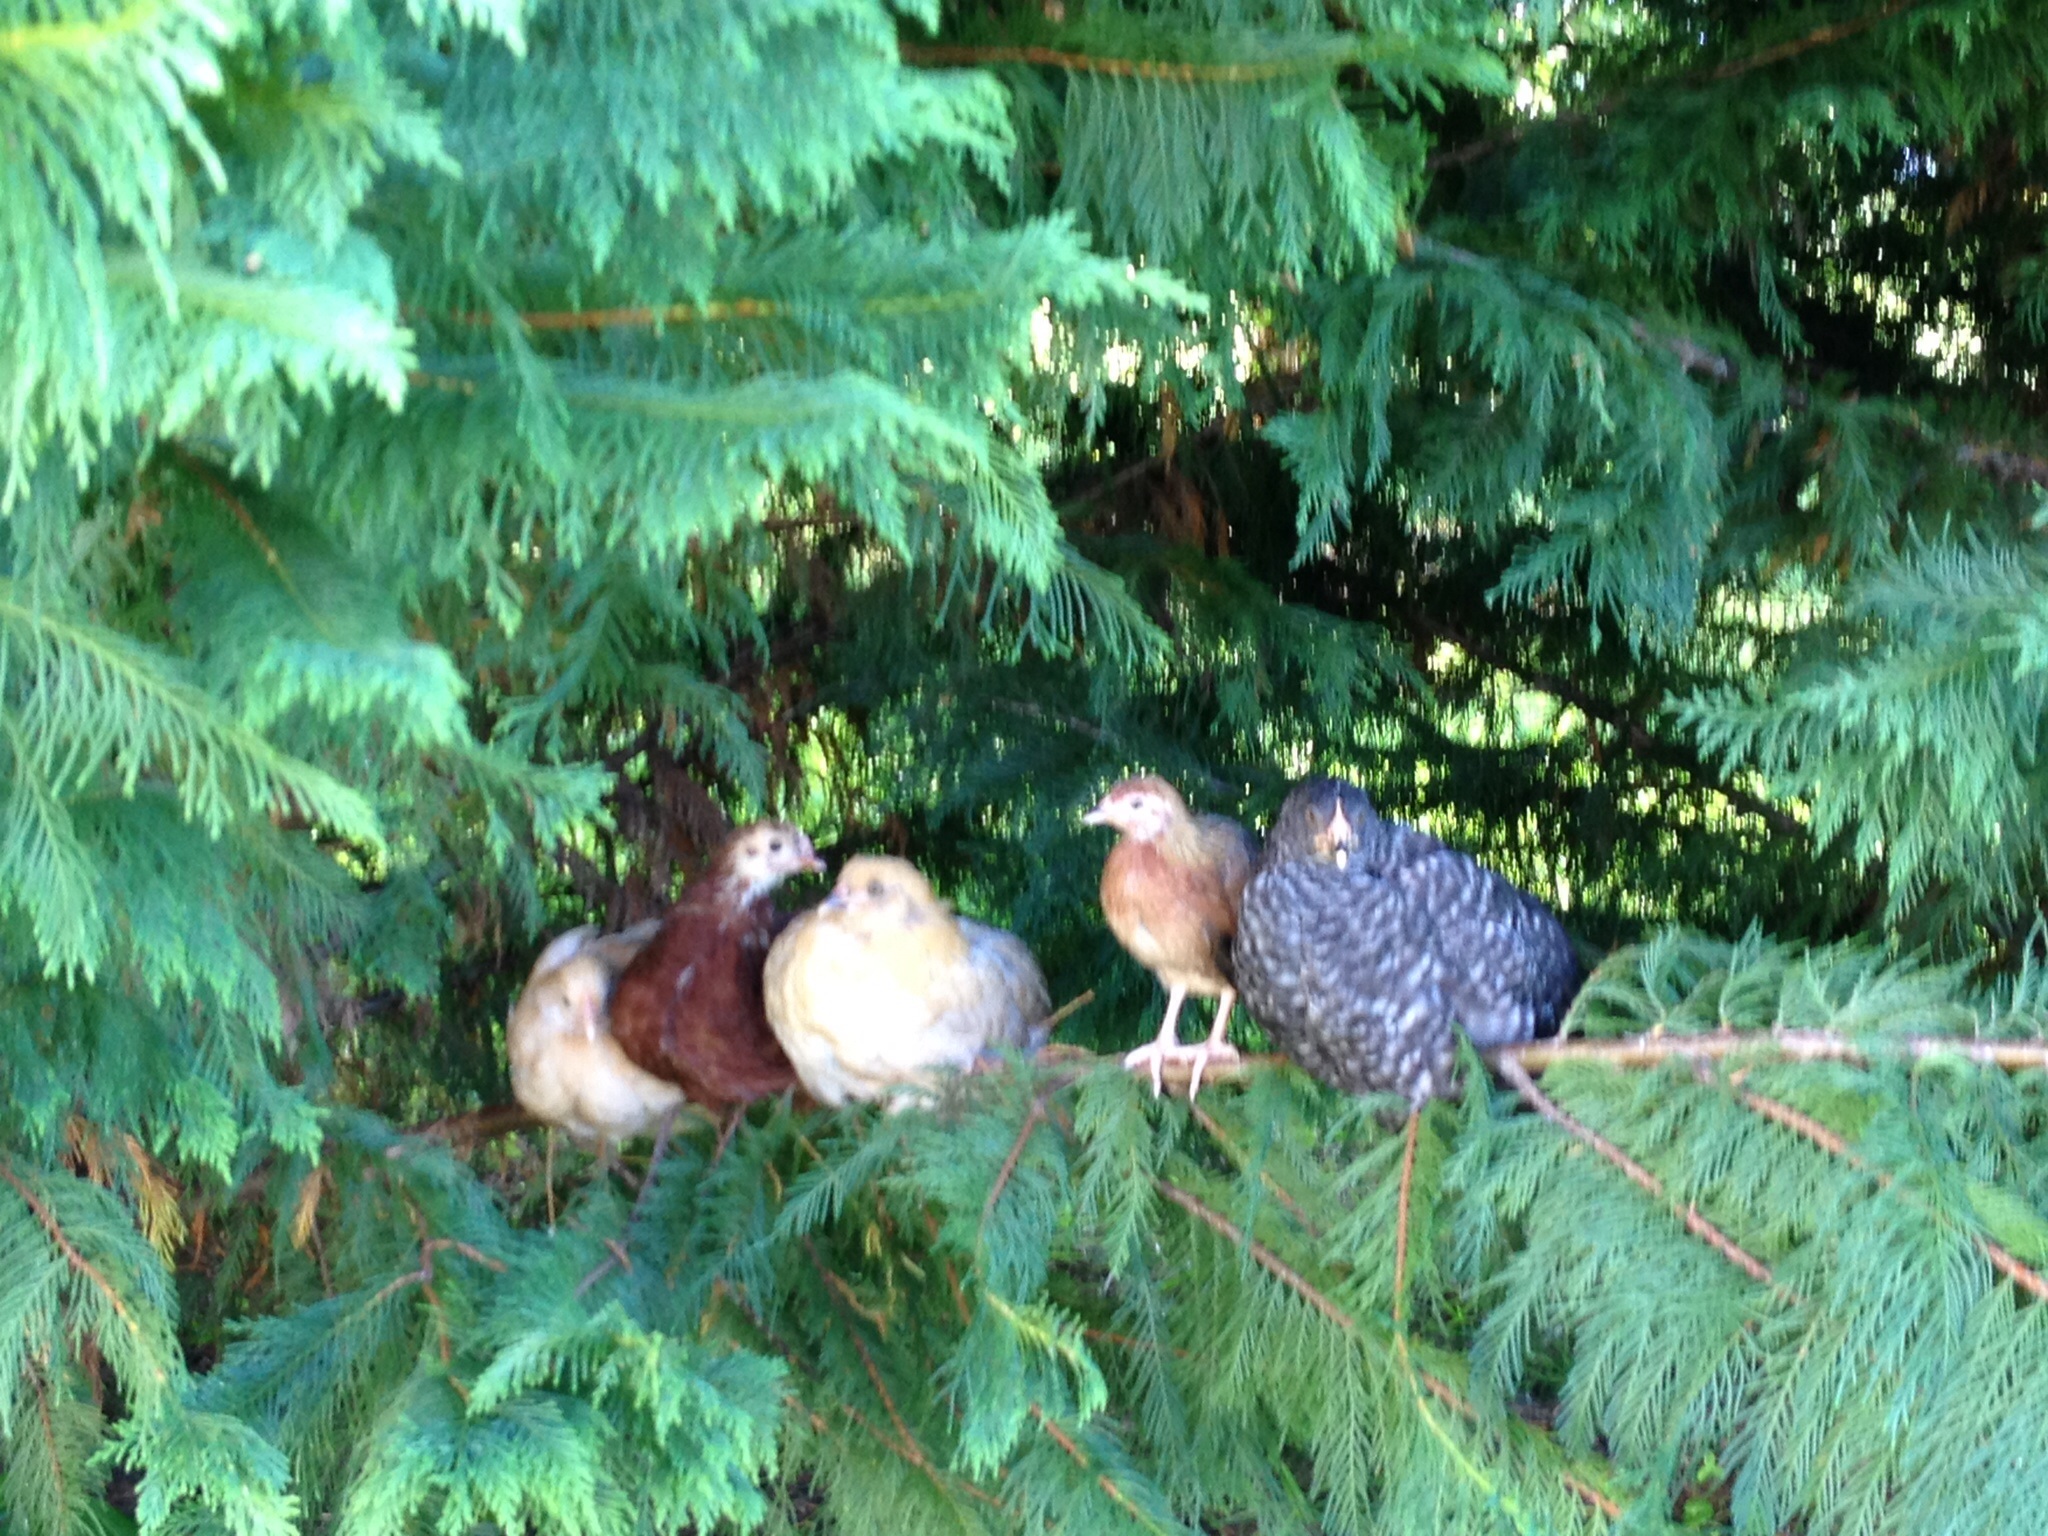 Our free range backyard baby chicks having a gossip festival.  The move to their backyard coop before sunset!